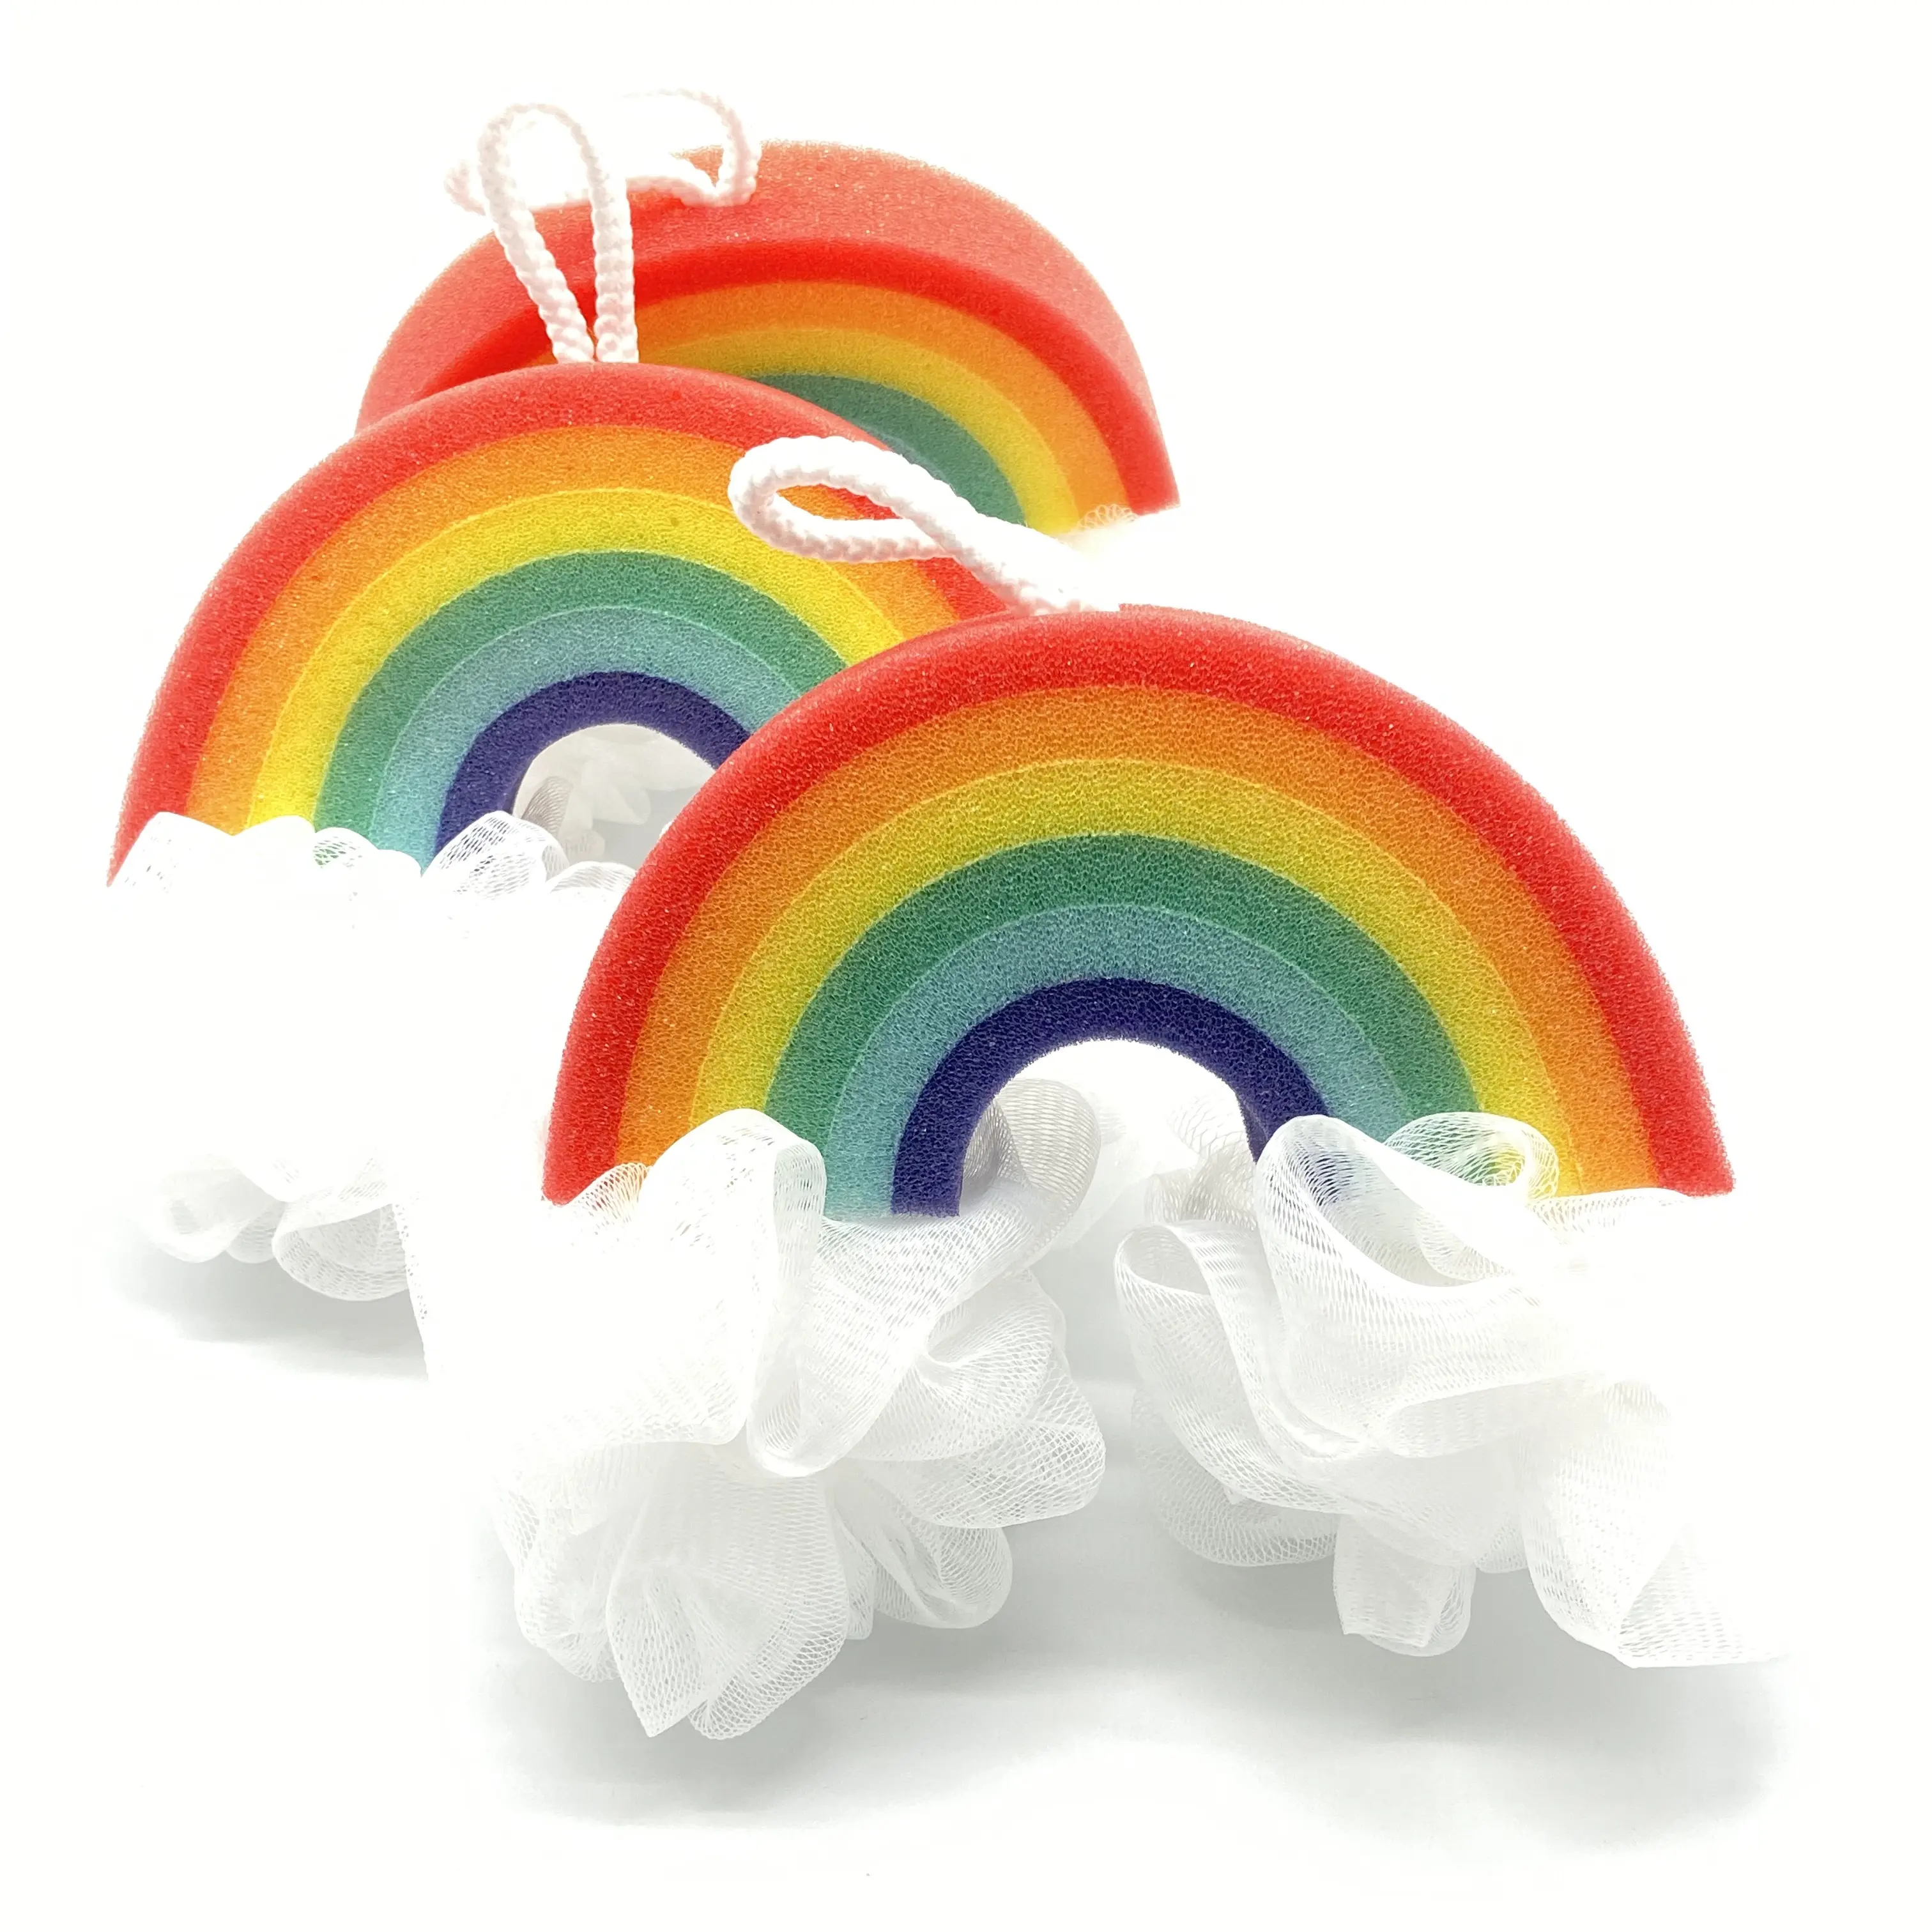 Hot Selling Fashion Mooie Rainbow Shaped Baby Bad Spons Body Douche Bal